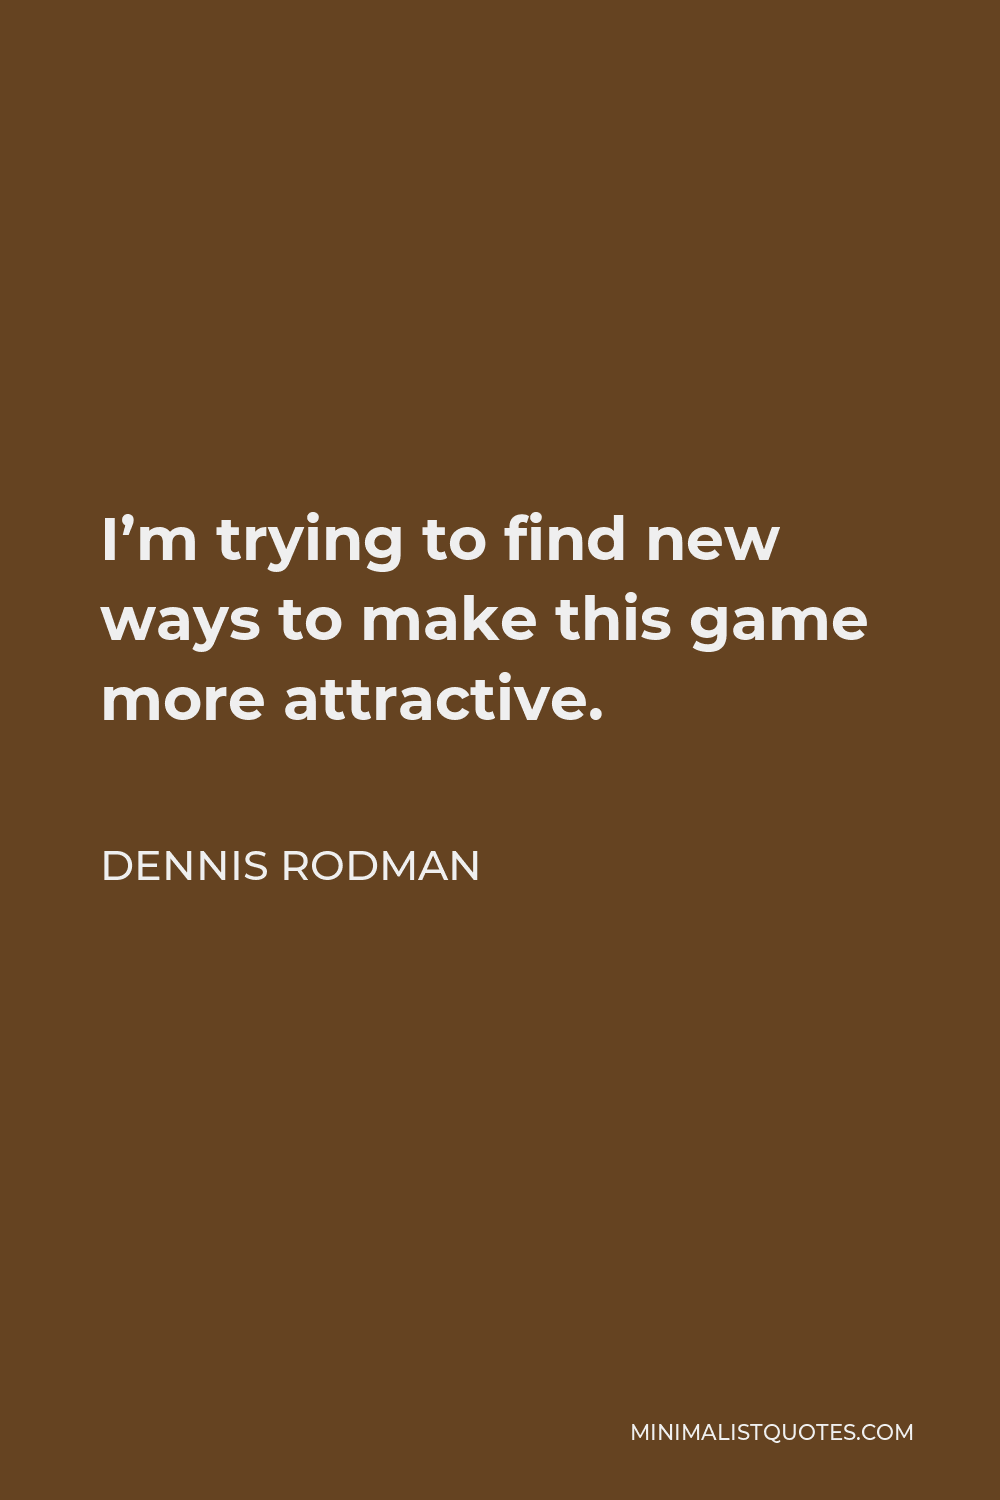 Dennis Rodman Quote - I’m trying to find new ways to make this game more attractive.